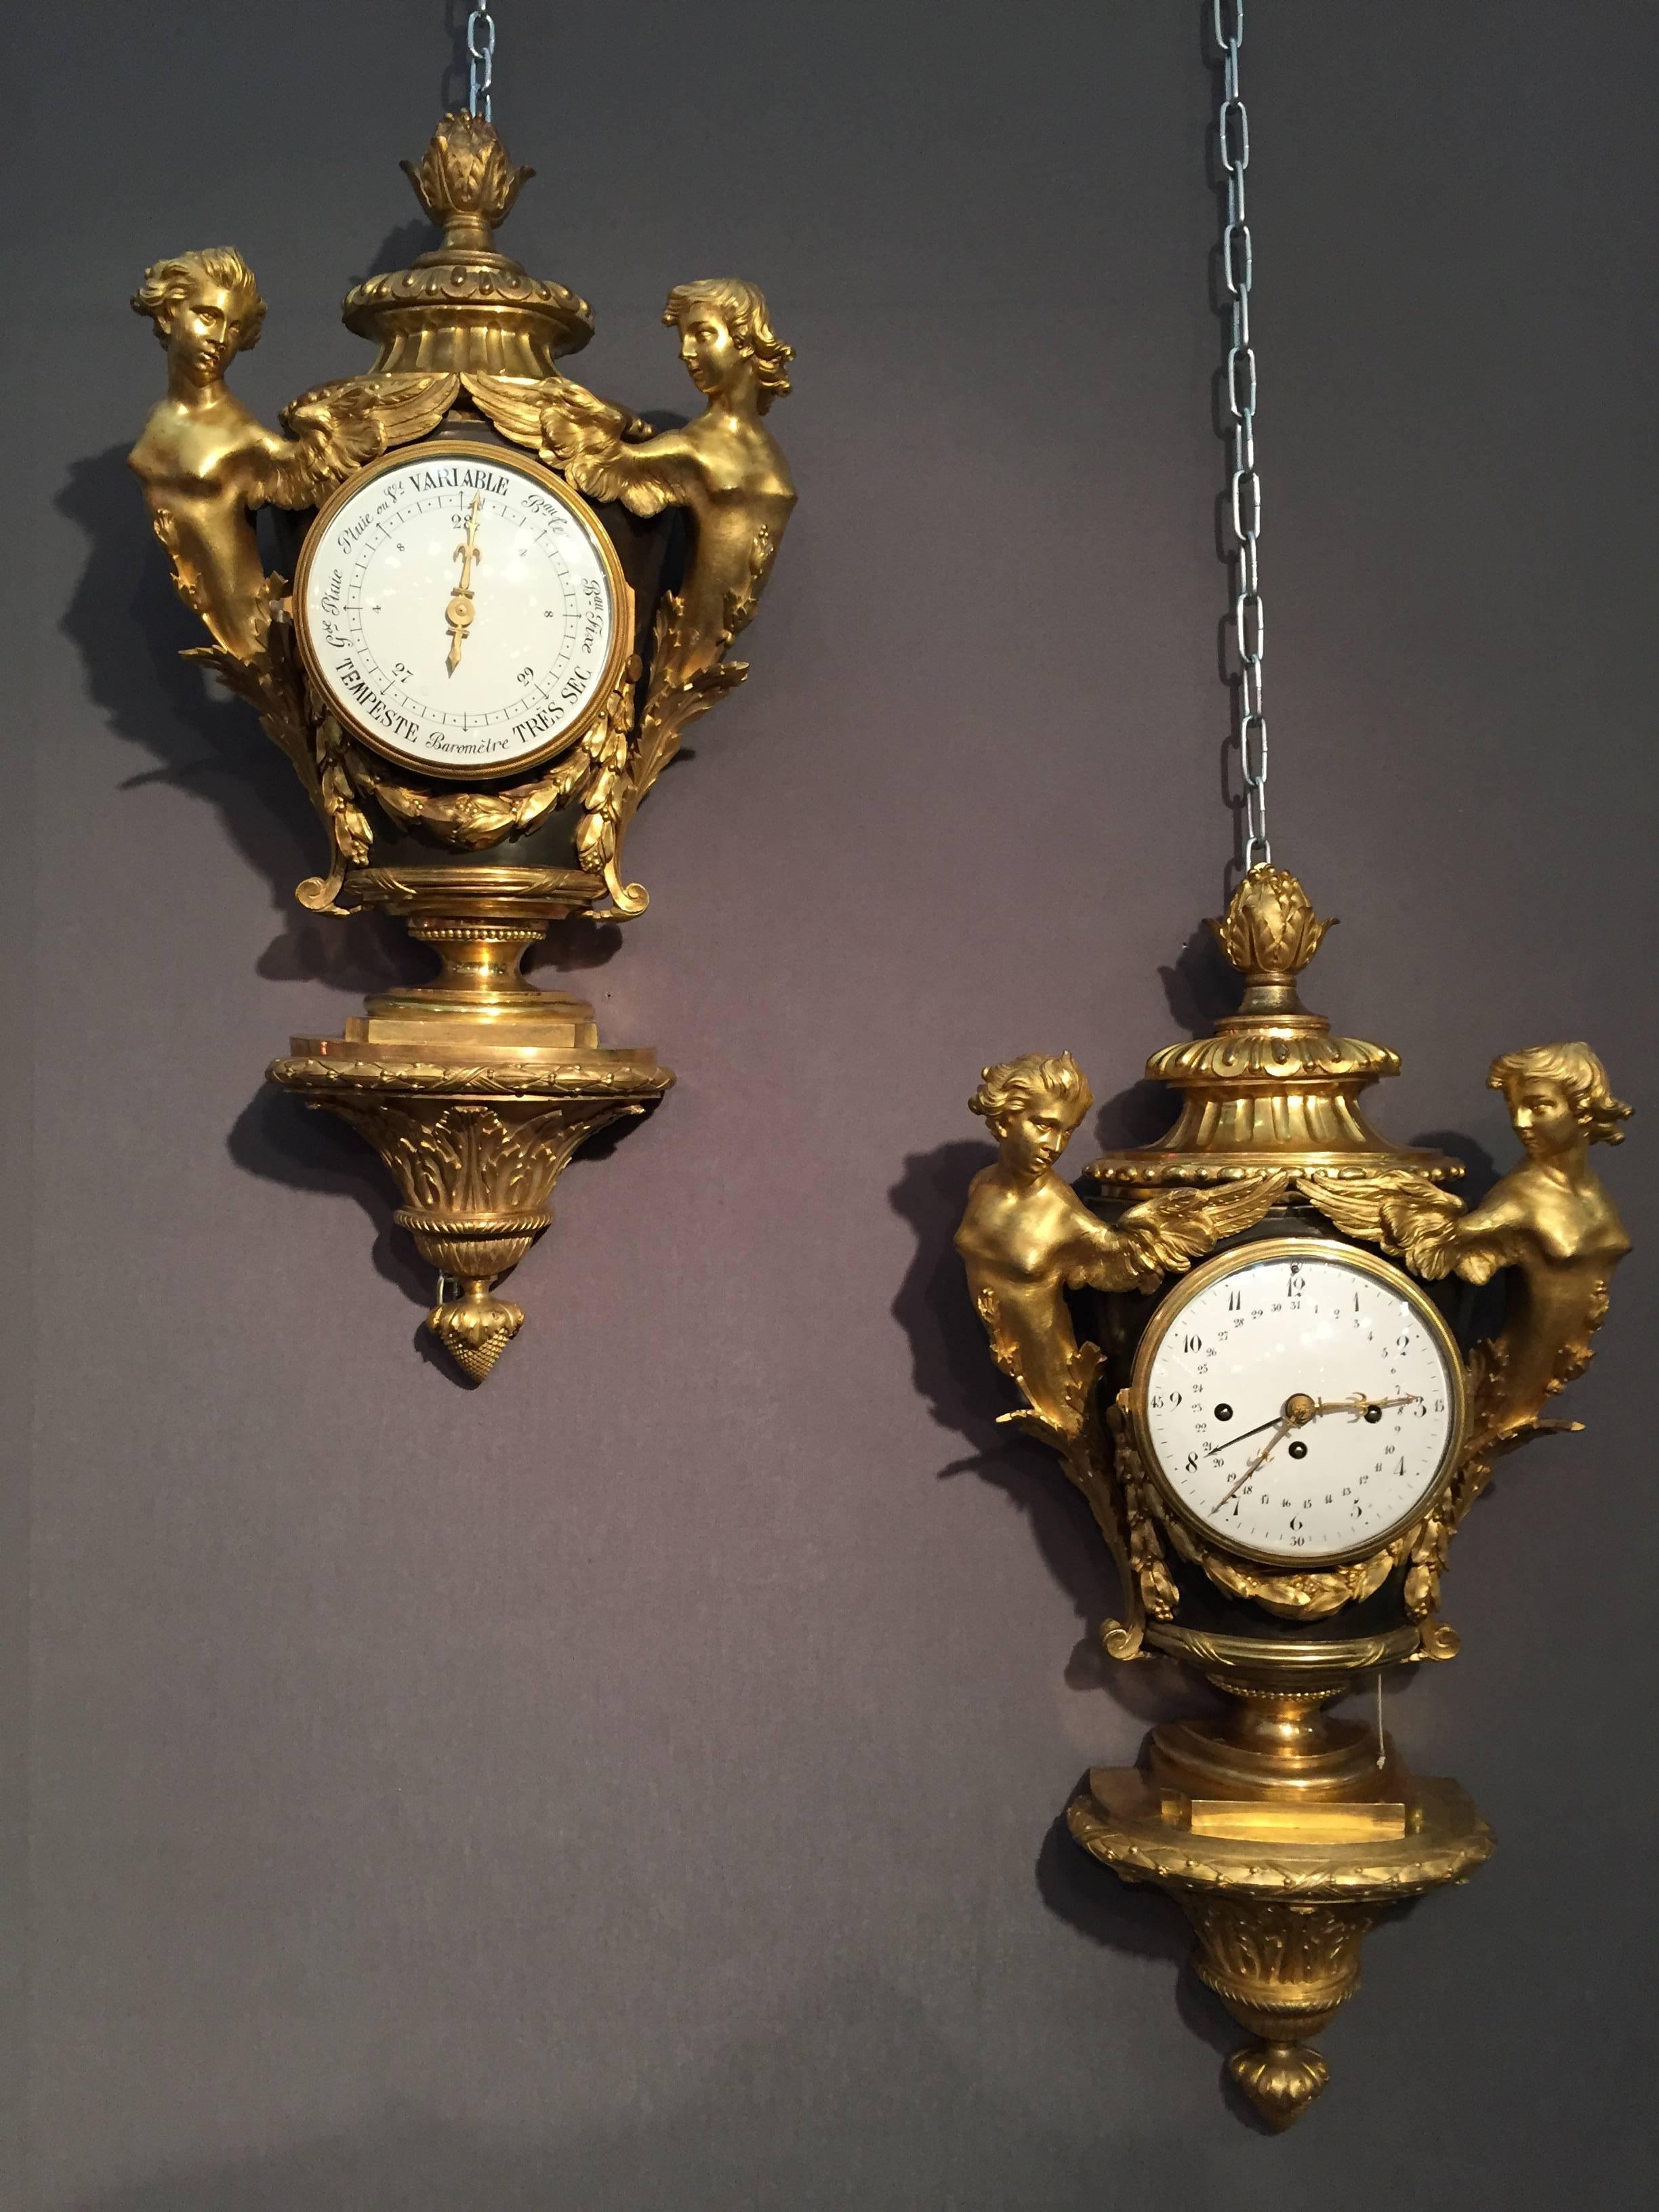 Rare pair of Cartel and barometer, Paris, circa 1775.
Rare alcove Cartel barometer sheet and ormolu, Paris, 1775.
Model vase-shaped balusters, body sheet metal adorned with a natural enamel dial, the latter stressed laurel garlands and flanked by